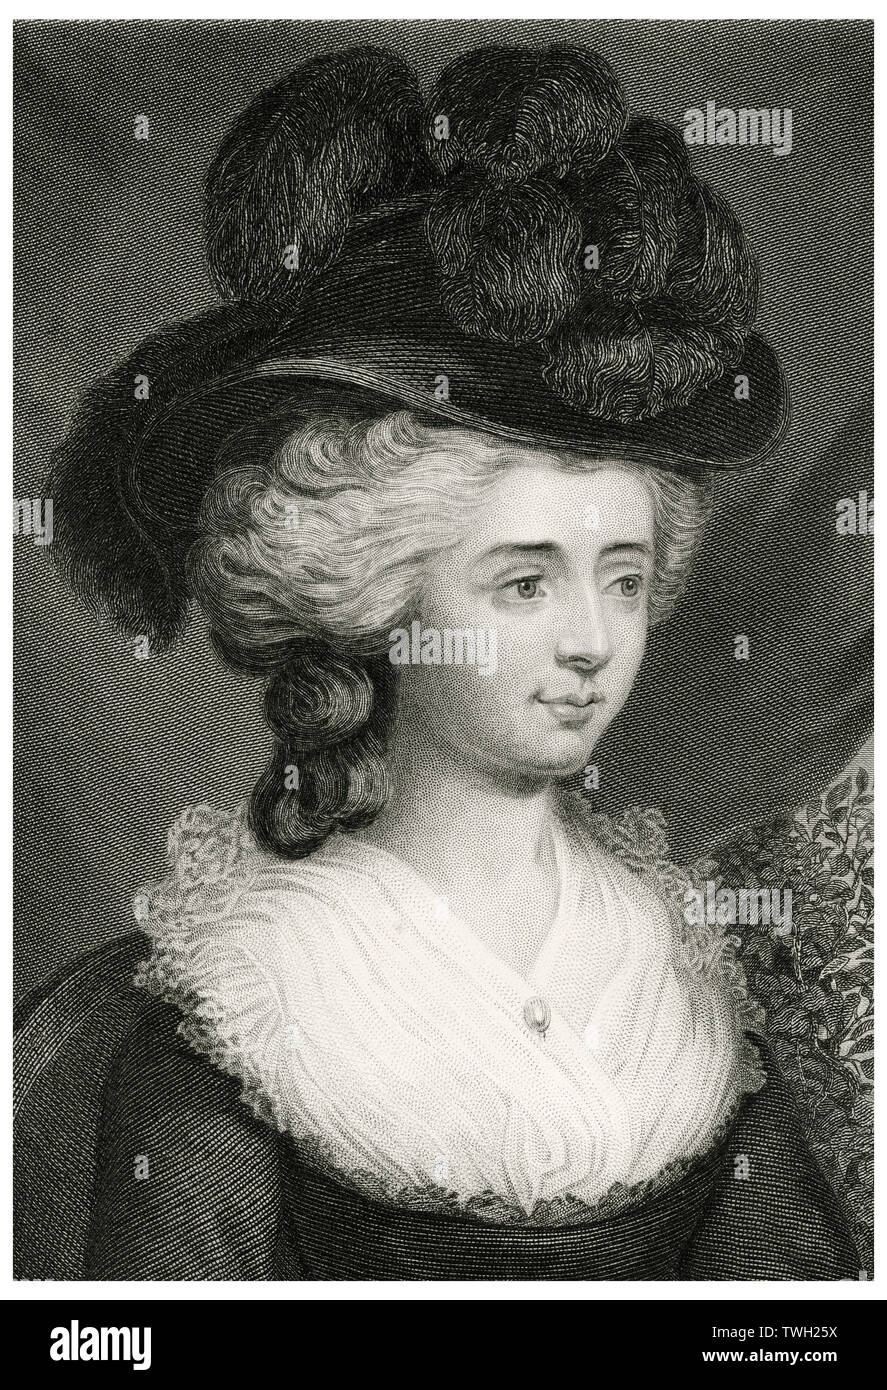 Frances Burney (1752-1840), also known as Madame d'Arblay, English Satirical Novelist and Playwright, Head and Shoulders Portrait, Steel Engraving, Portrait Gallery of Eminent Men and Women of Europe and America by Evert A. Duyckinck, Published by Henry J. Johnson, Johnson, Wilson & Company, New York, 1873 Stock Photo